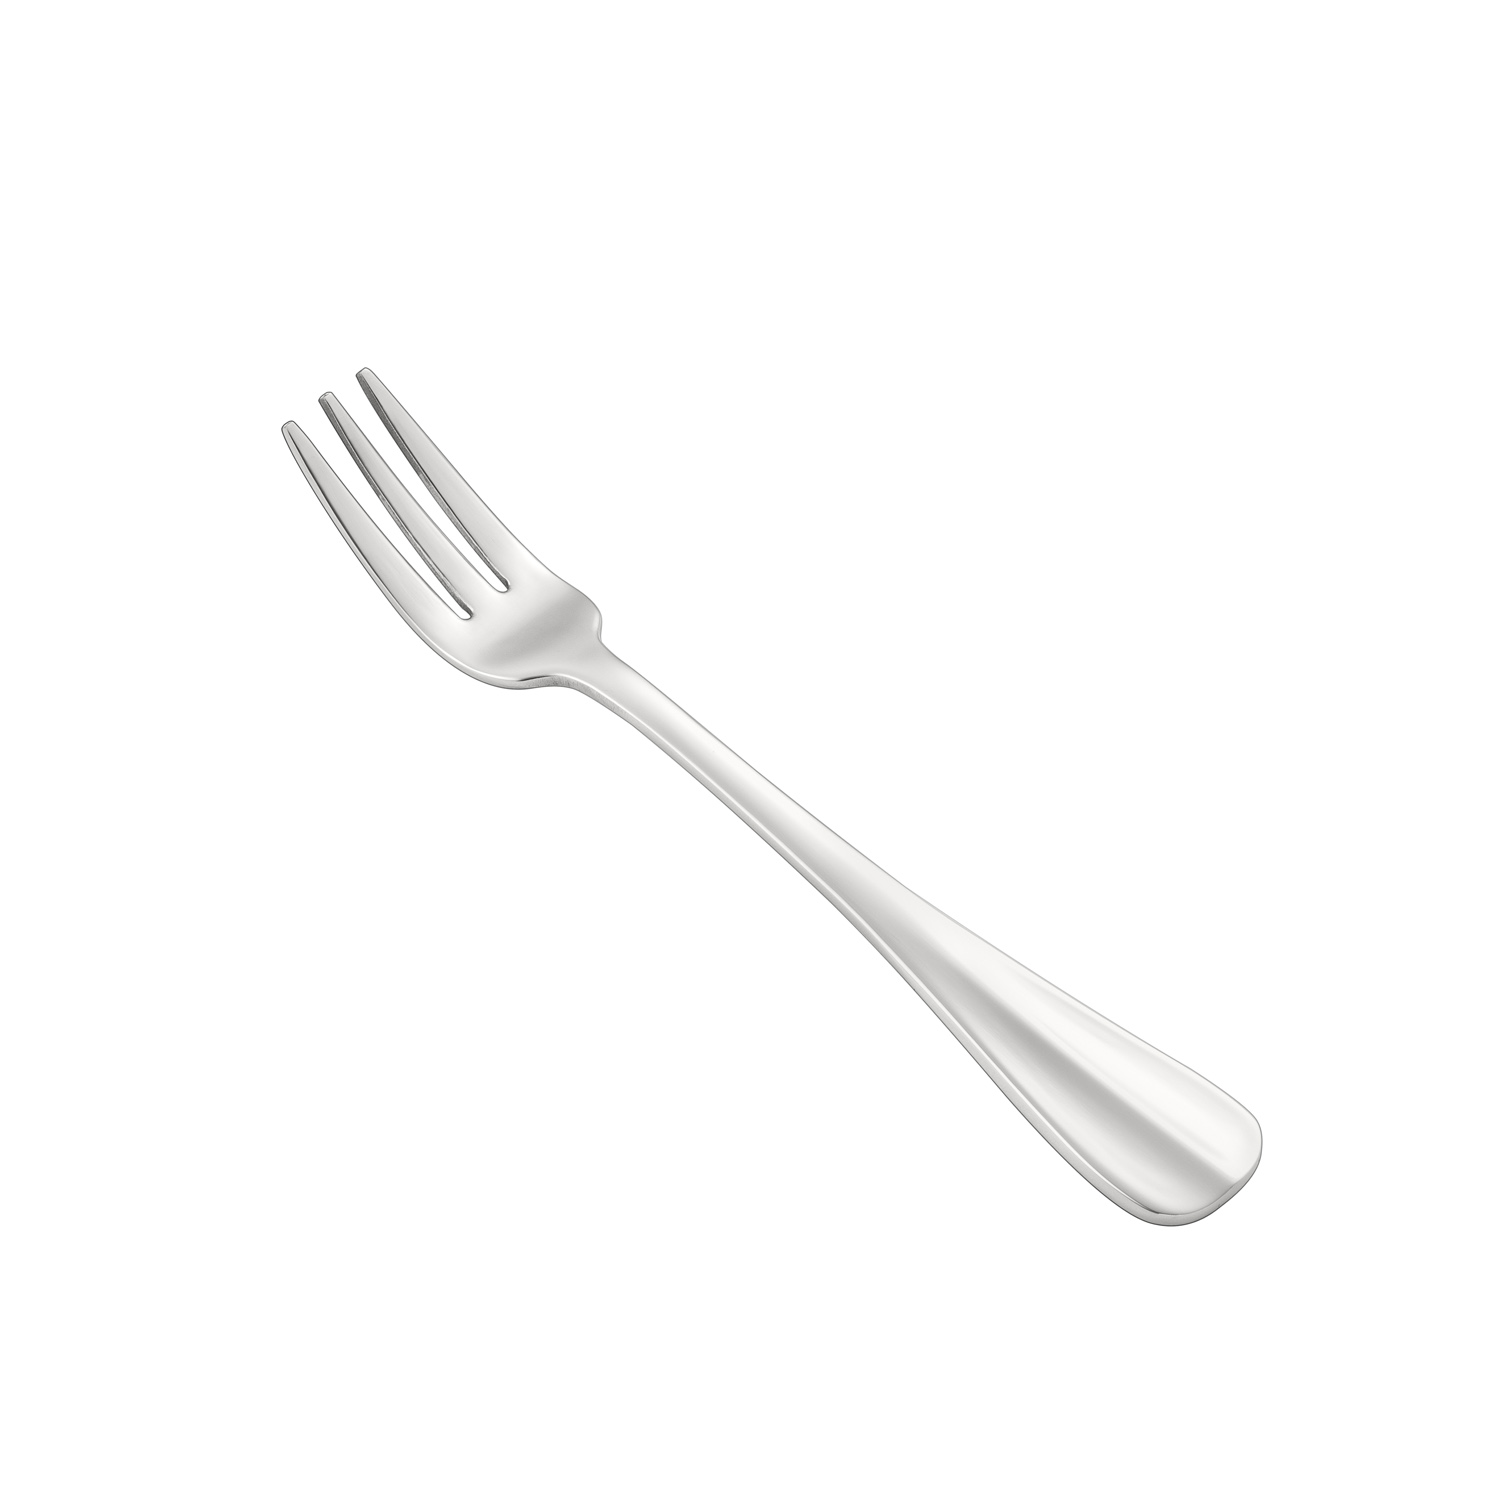 CAC China 8005-07 Exquisite Oyster Fork, Extra Heavyweight 18/8, 5 1/2"